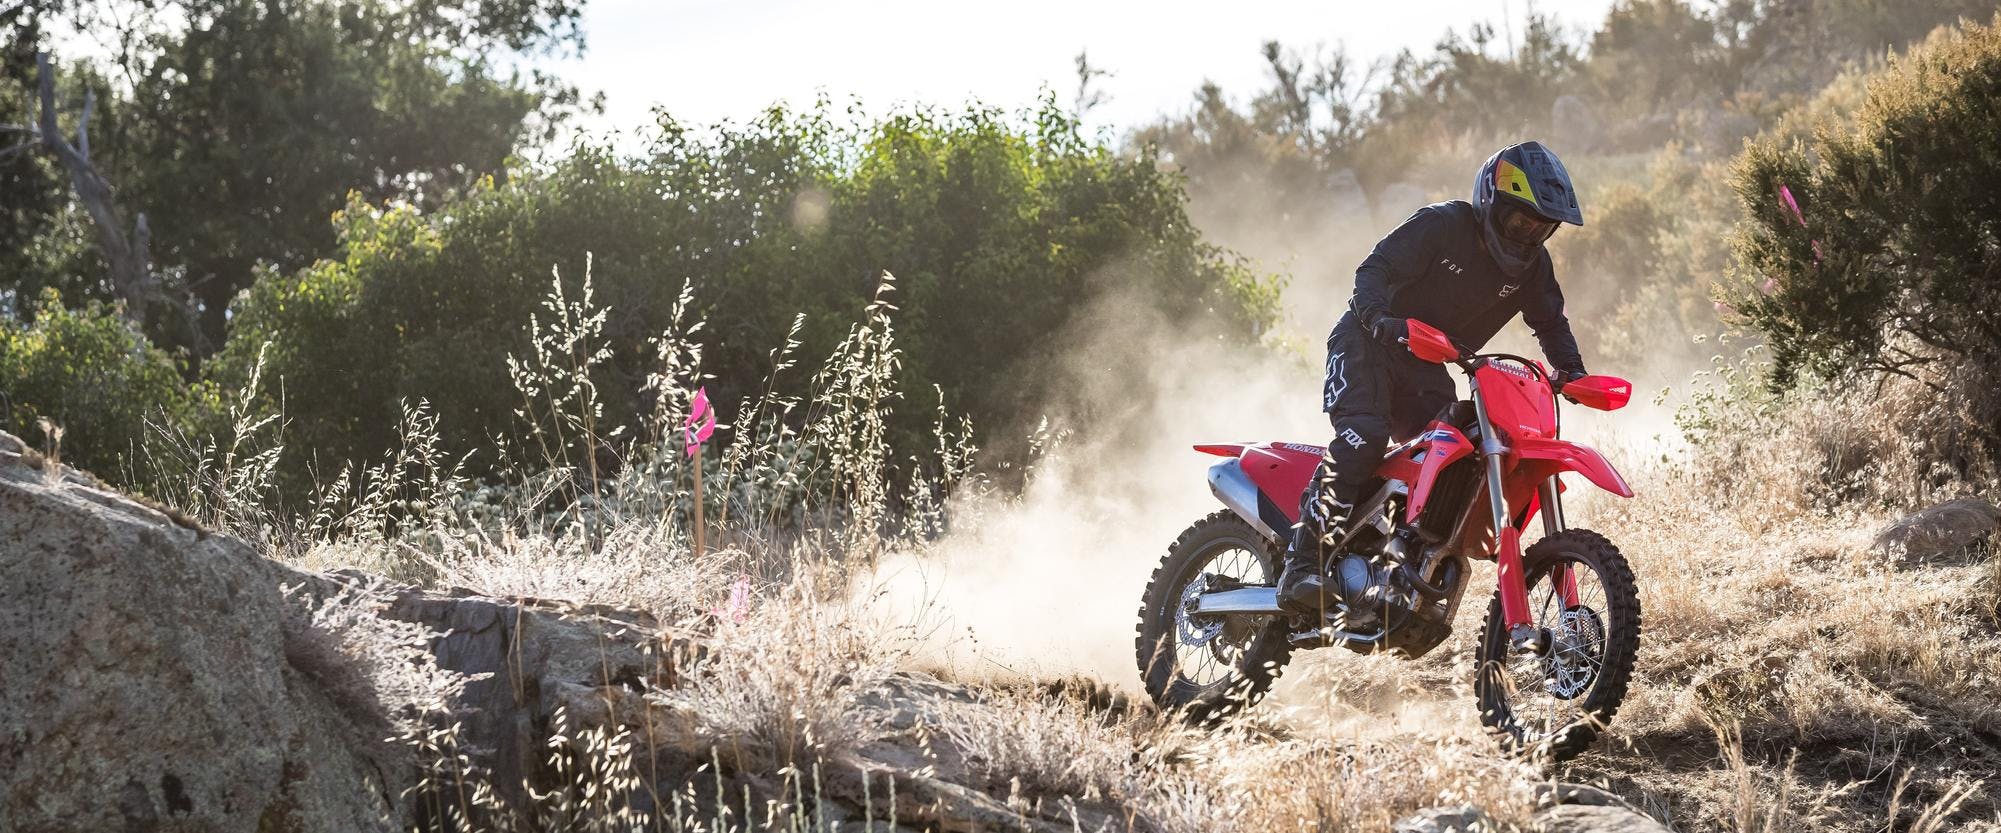 Honda CRF450RX in extreme red colour in action on off road track